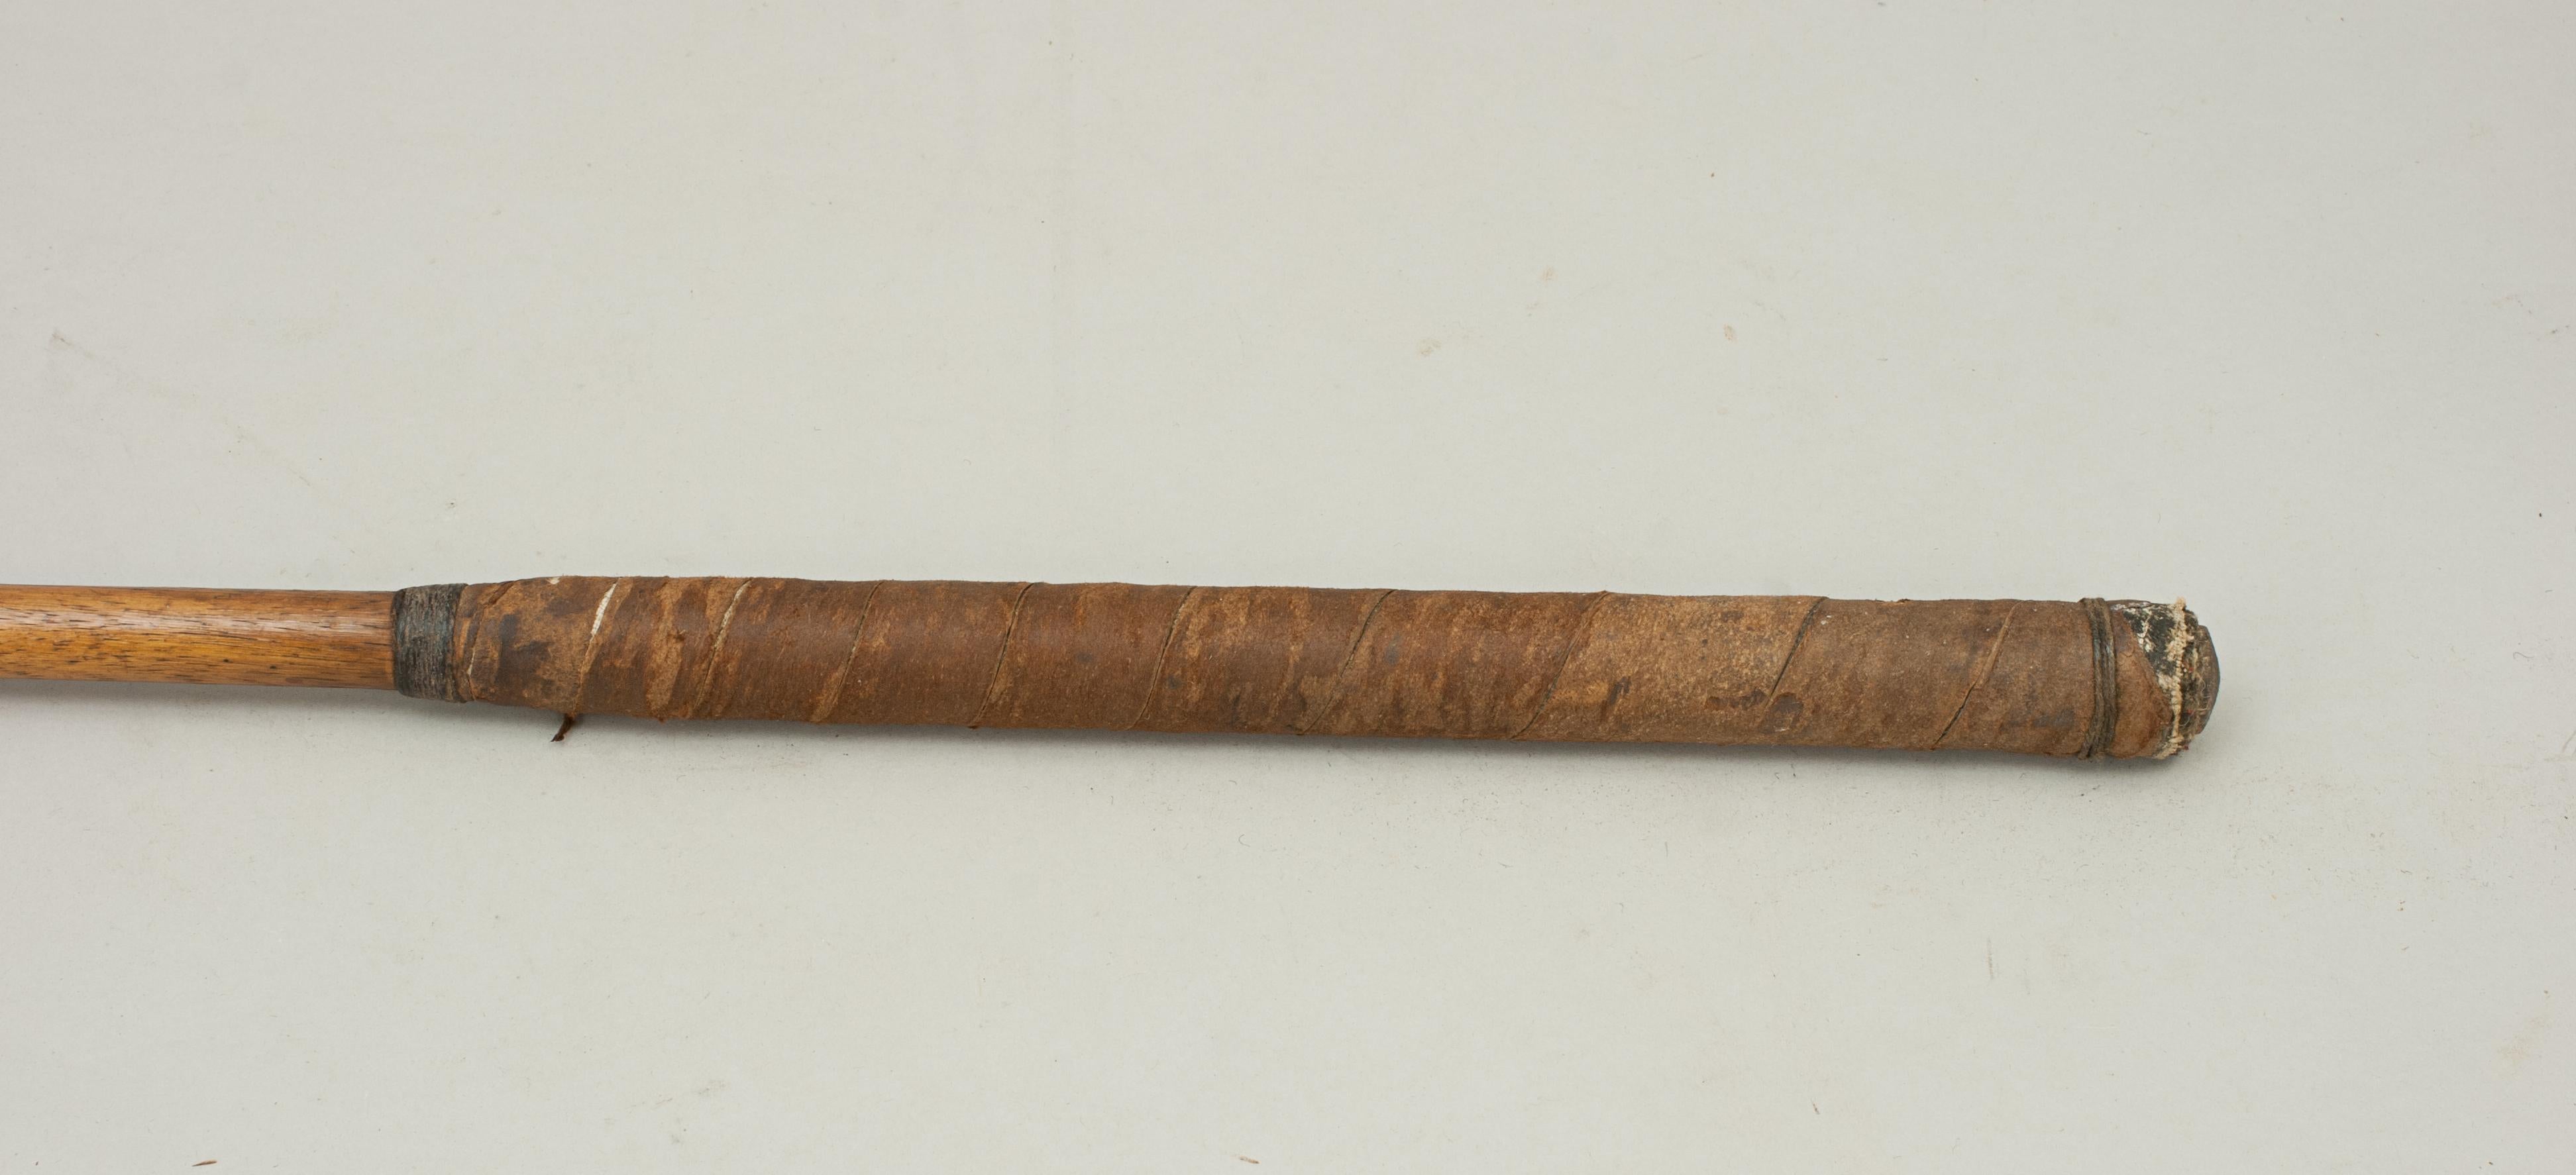 Antique Golf Club, Heavy Rut Iron, Track Iron by Robert White, St Andrews 4